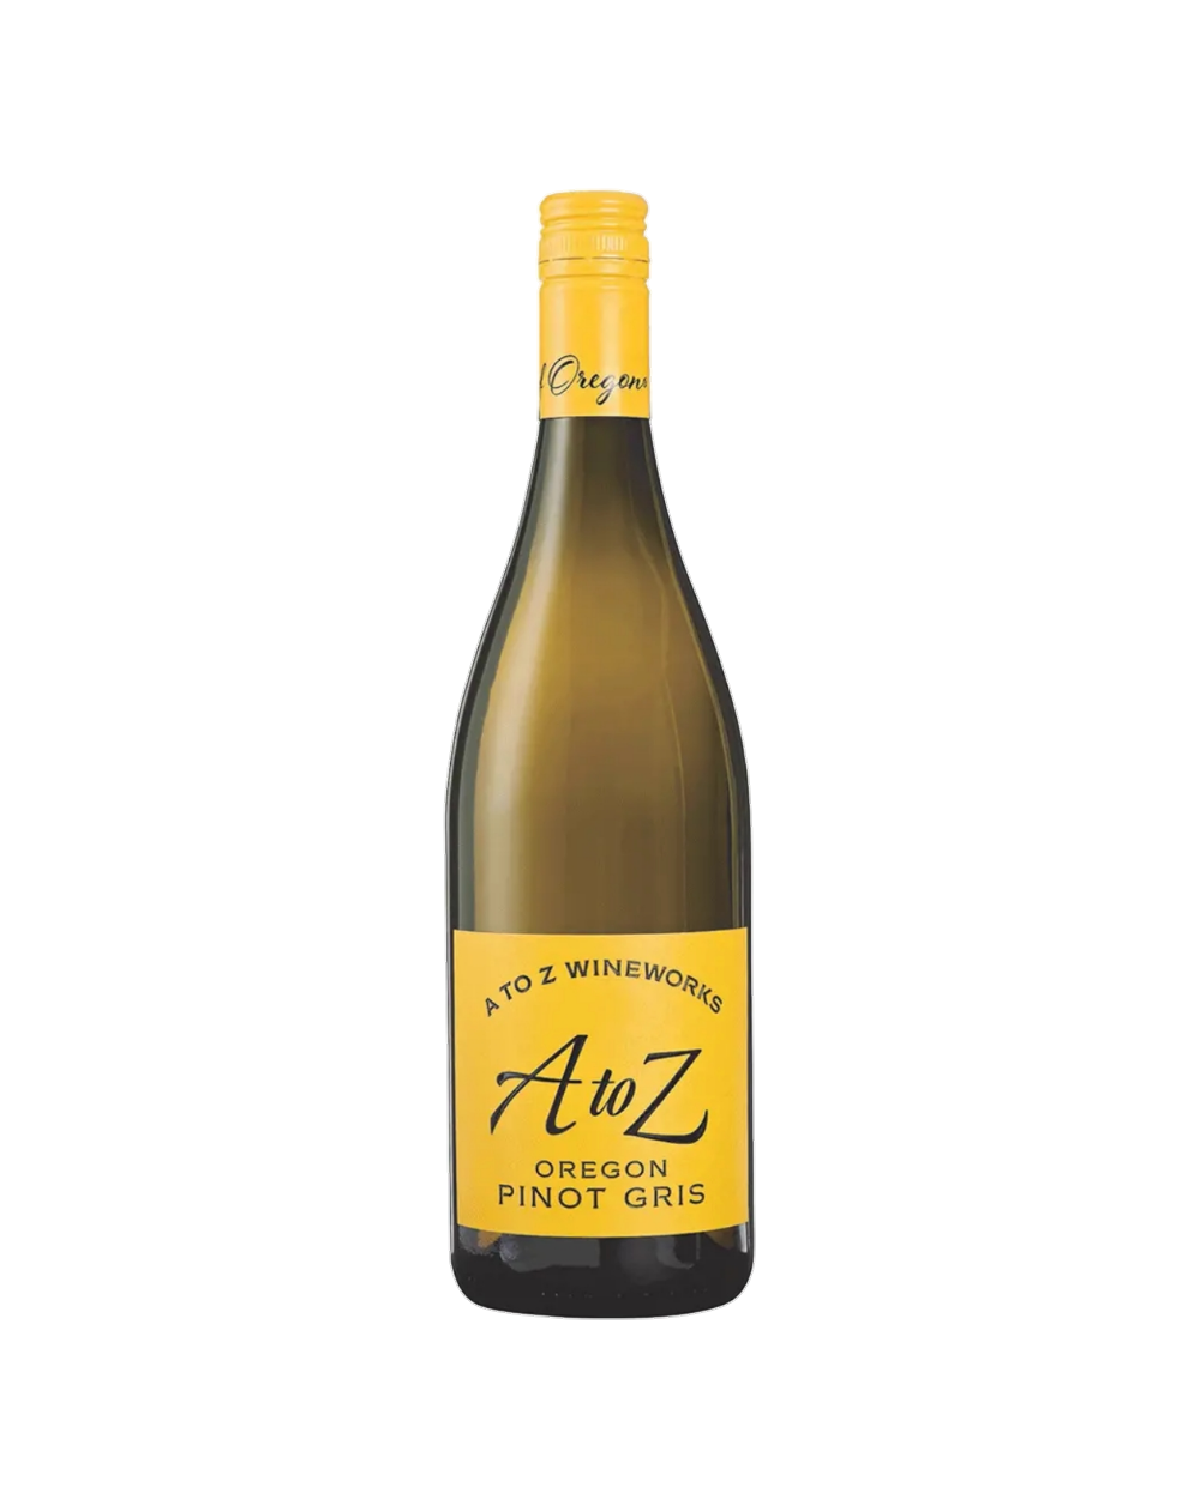 A to Z pinot gris